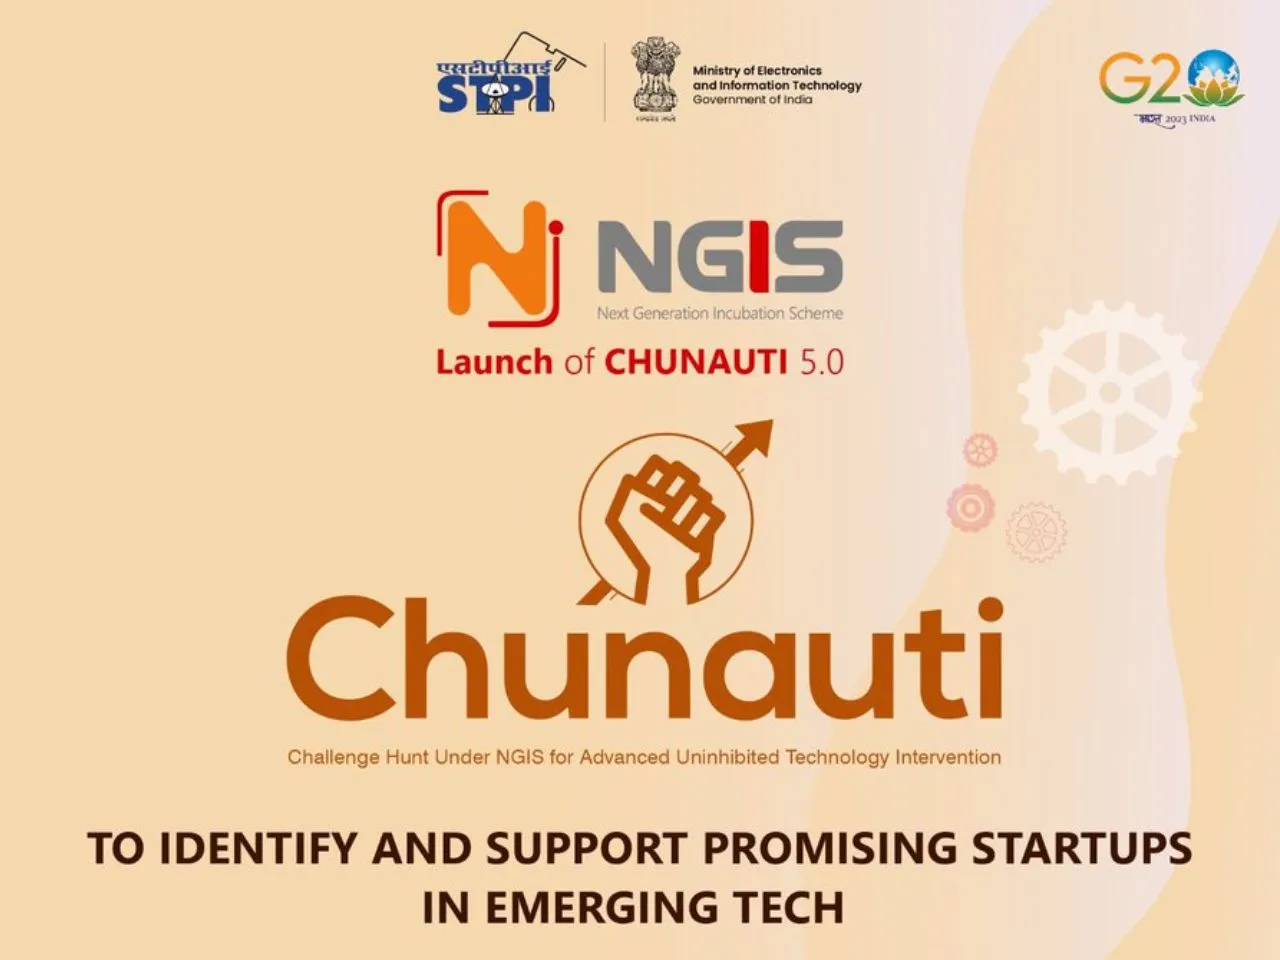 MeITY Throws Chunauti 5.0 For Startups In Emerging Tech